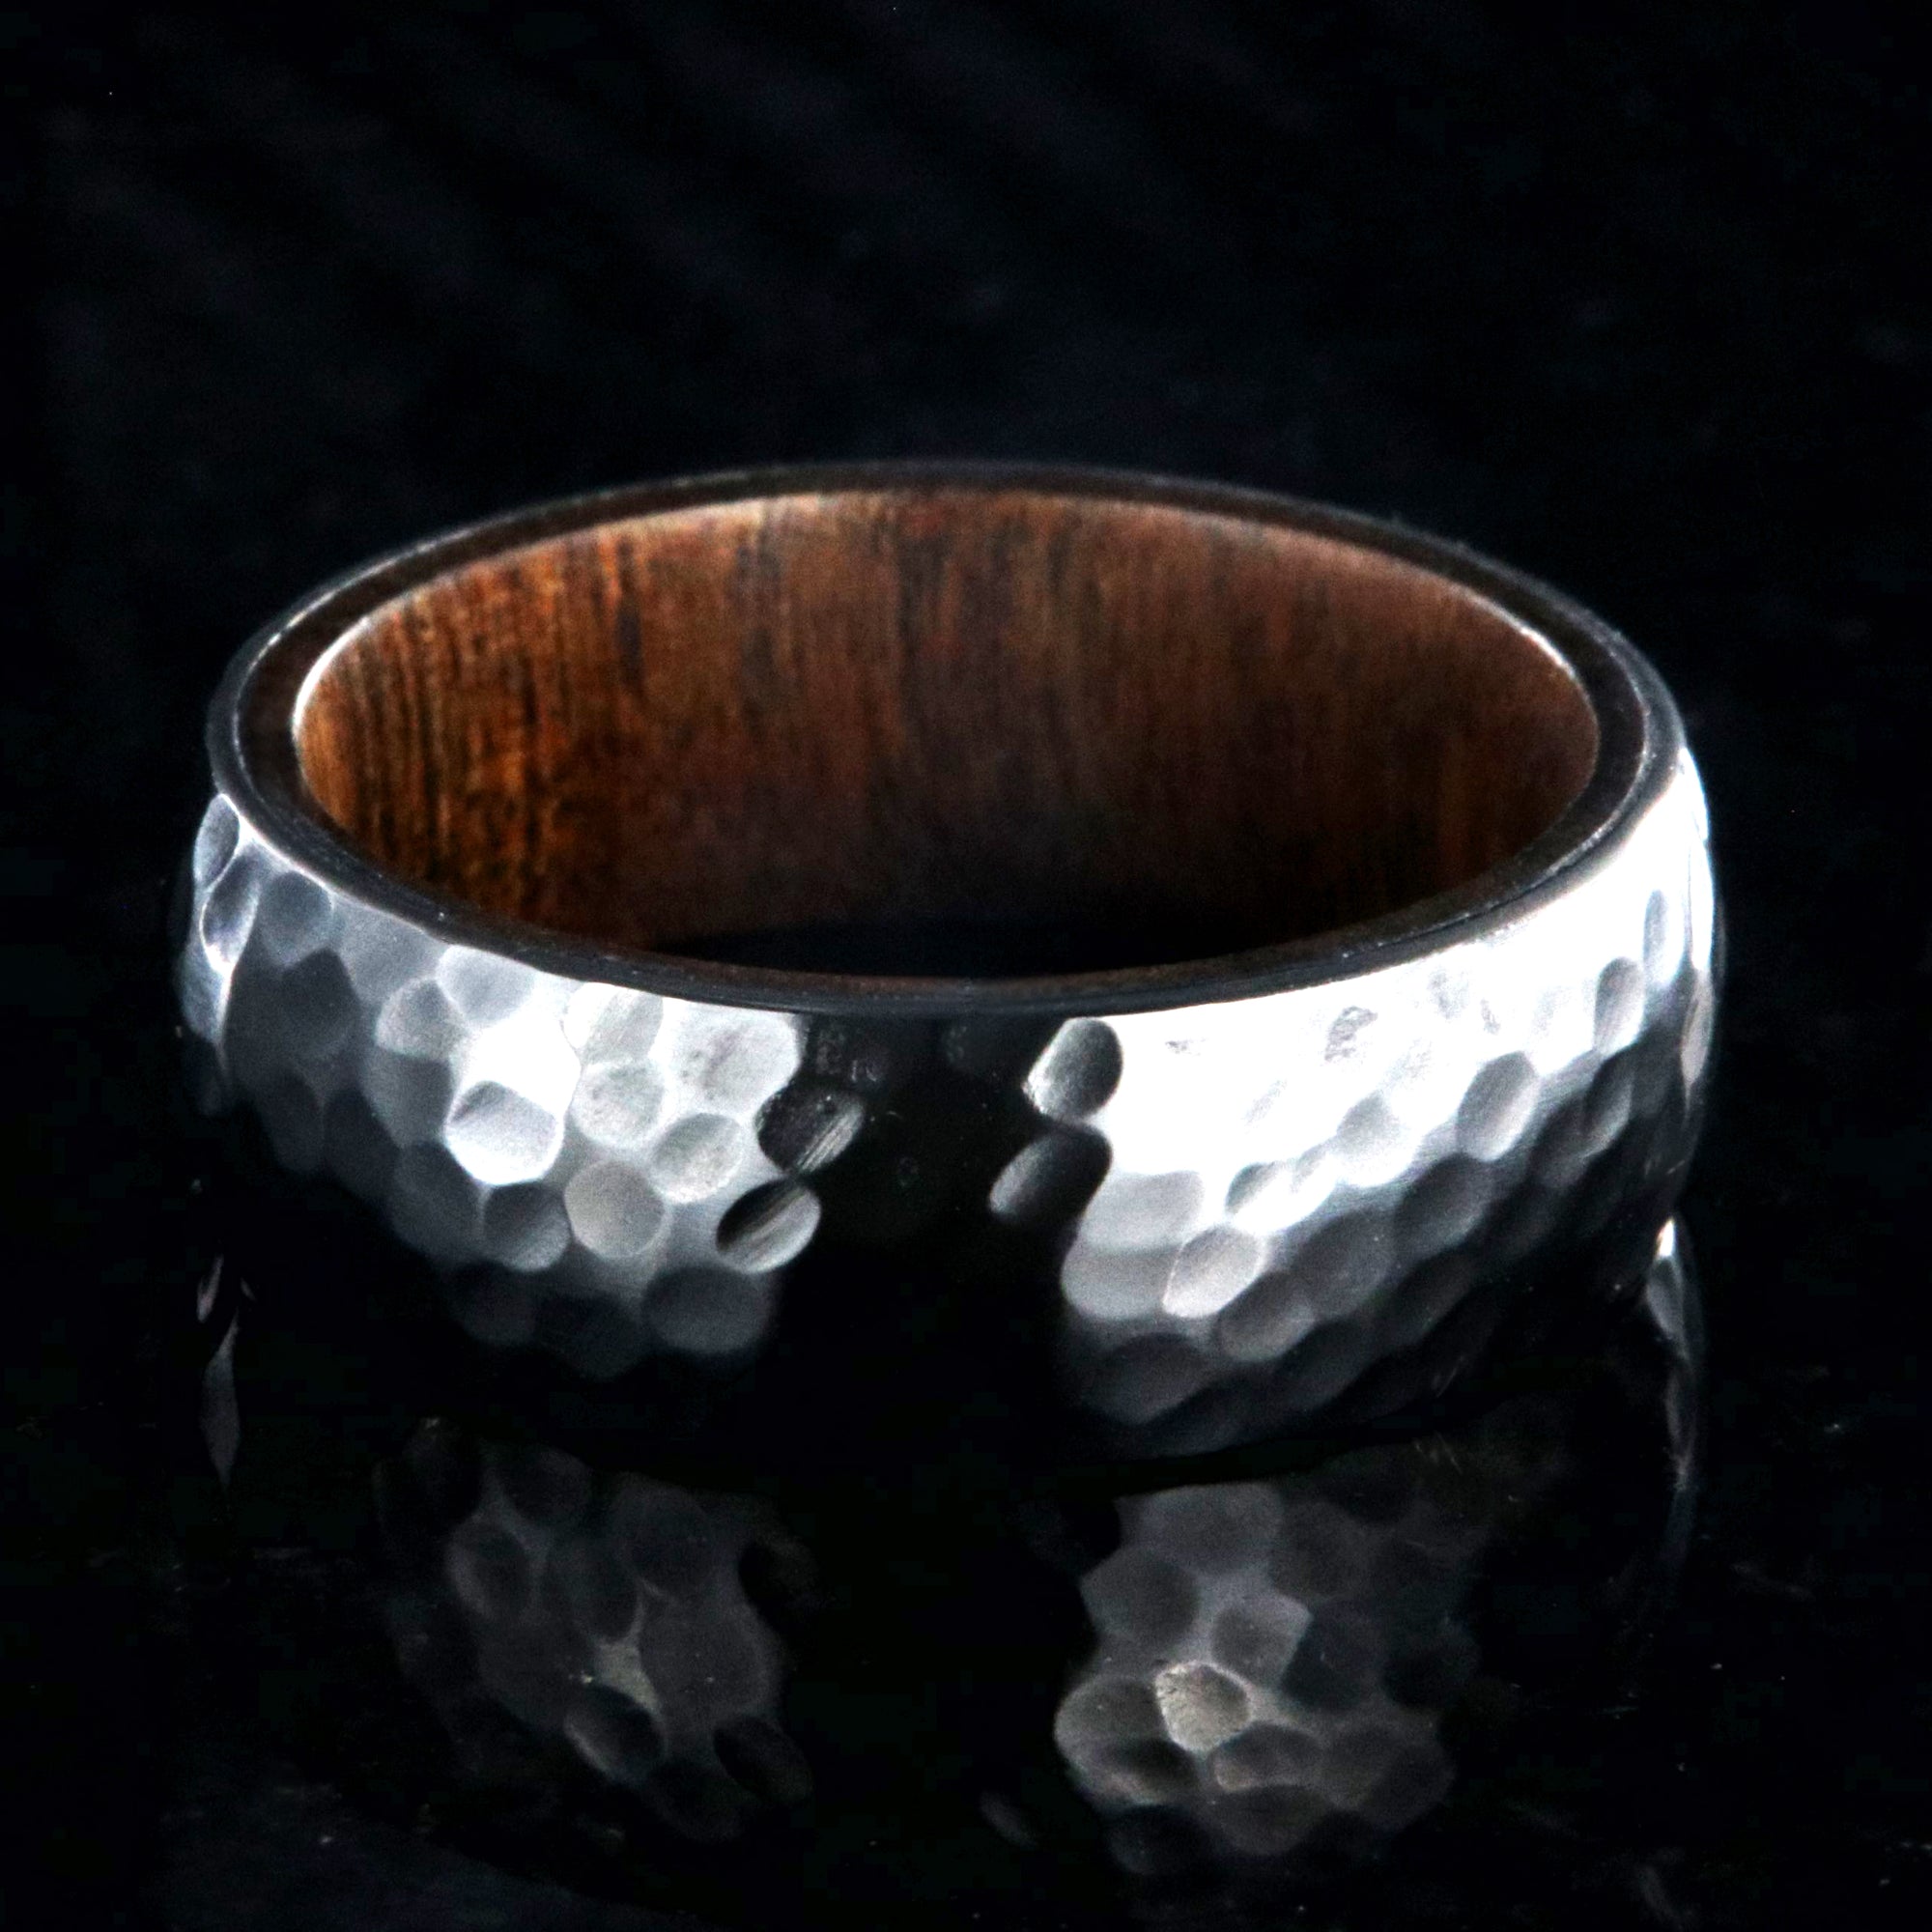 8mm wide black zirconium ring with a hammered finish and a rosewood sleeve